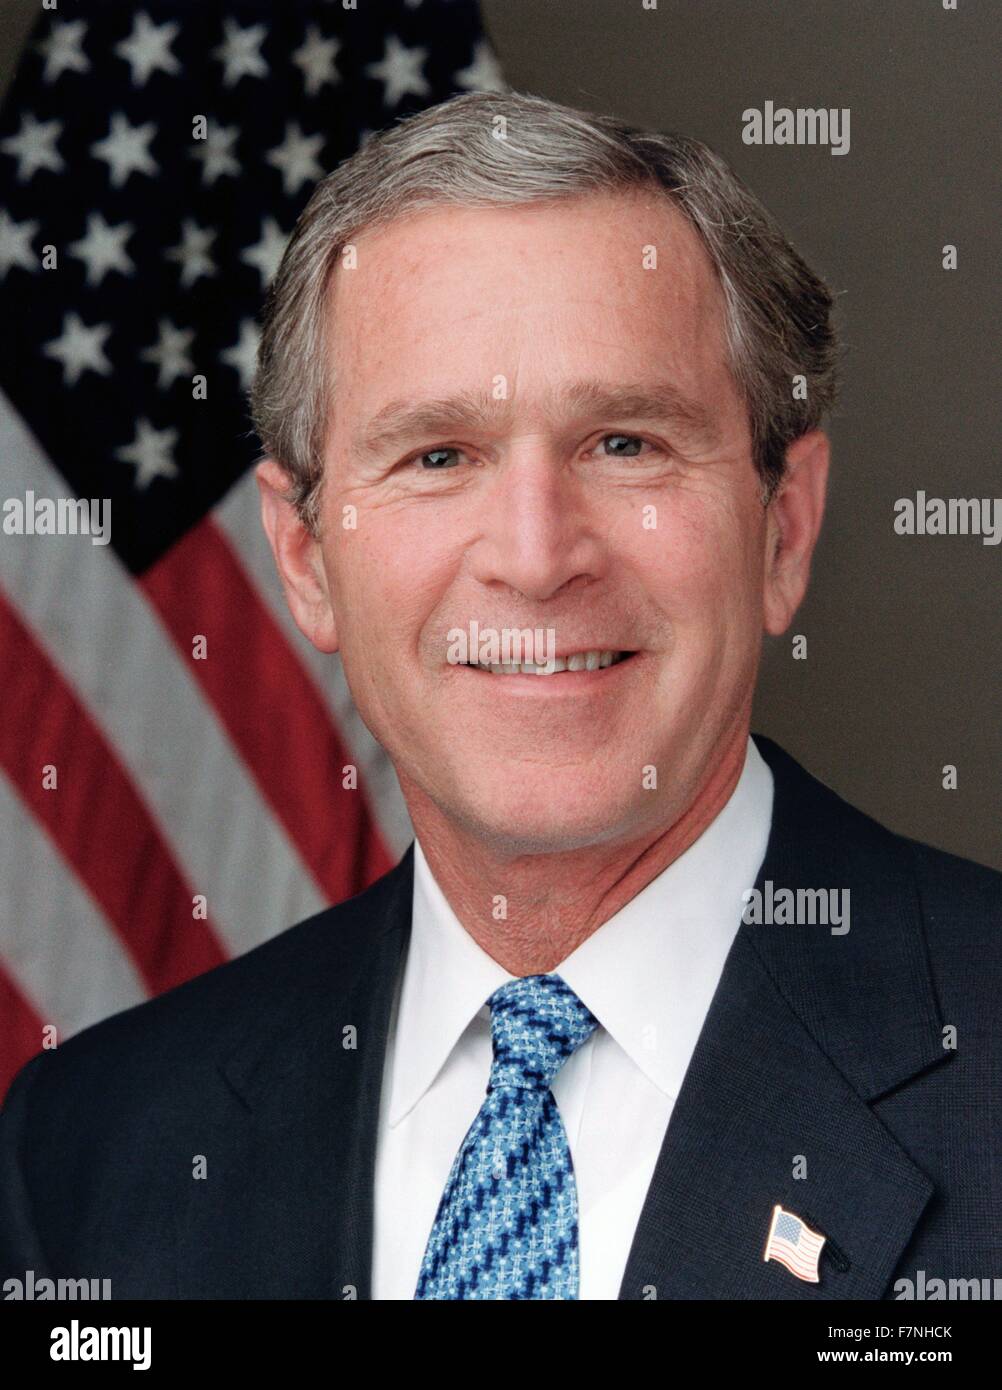 George Walker Bush (born July 6, 1946)   President of the United States from 2001 to 2009, and the 46th Governor of Texas from 1995 to 2000. Stock Photo